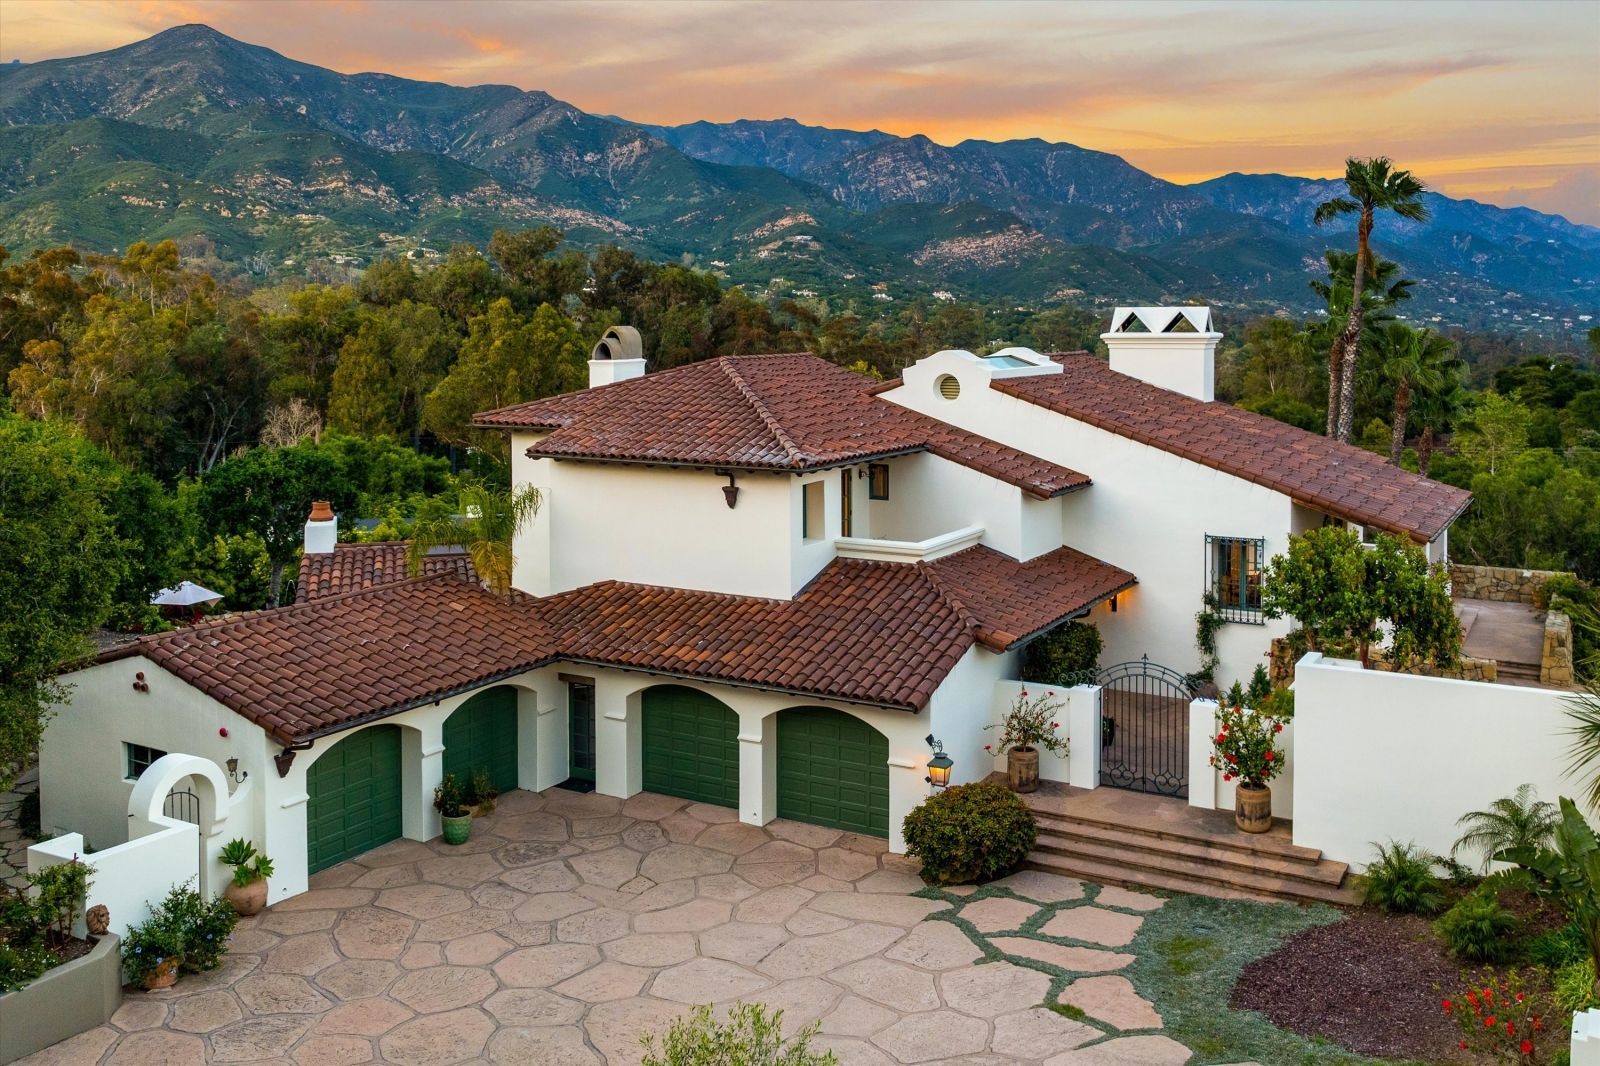 A Spanish Colonial Revival-style home with a red tiled roof framed by mountains and a beautiful yellow and gold sky